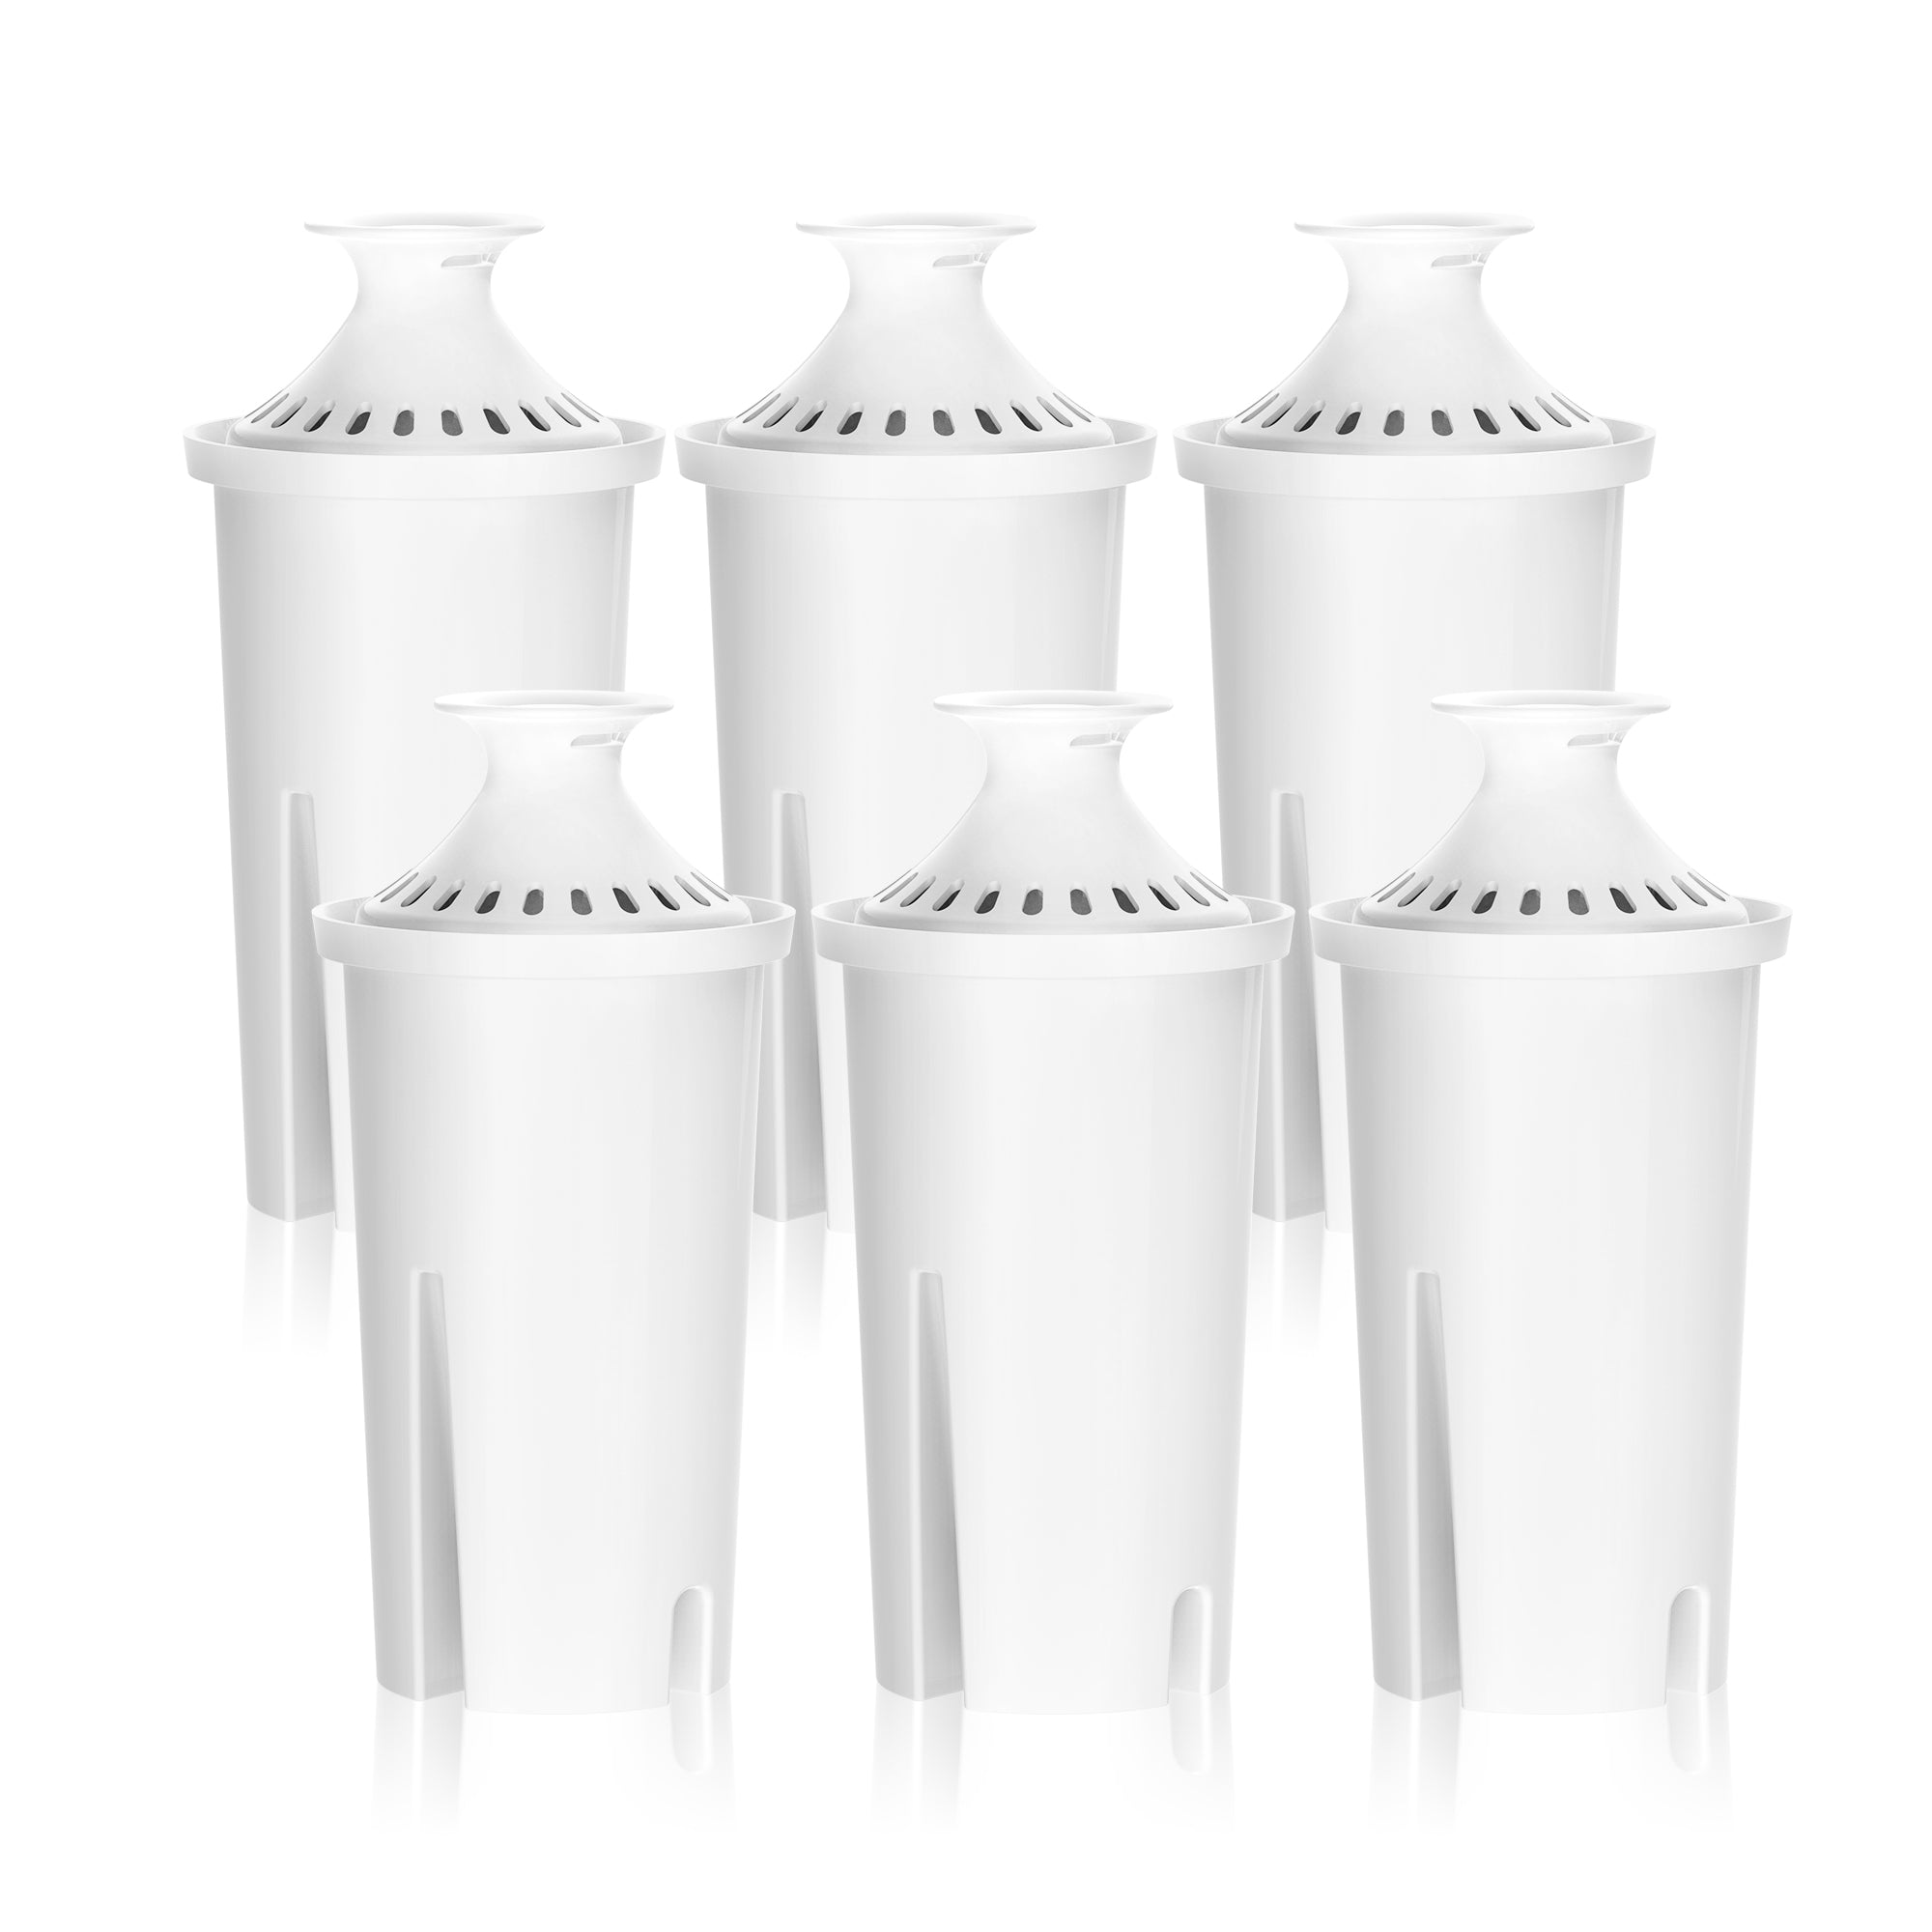 AQUA CREST Replacement for Brita® Pitchers and Dispensers, 6 Count